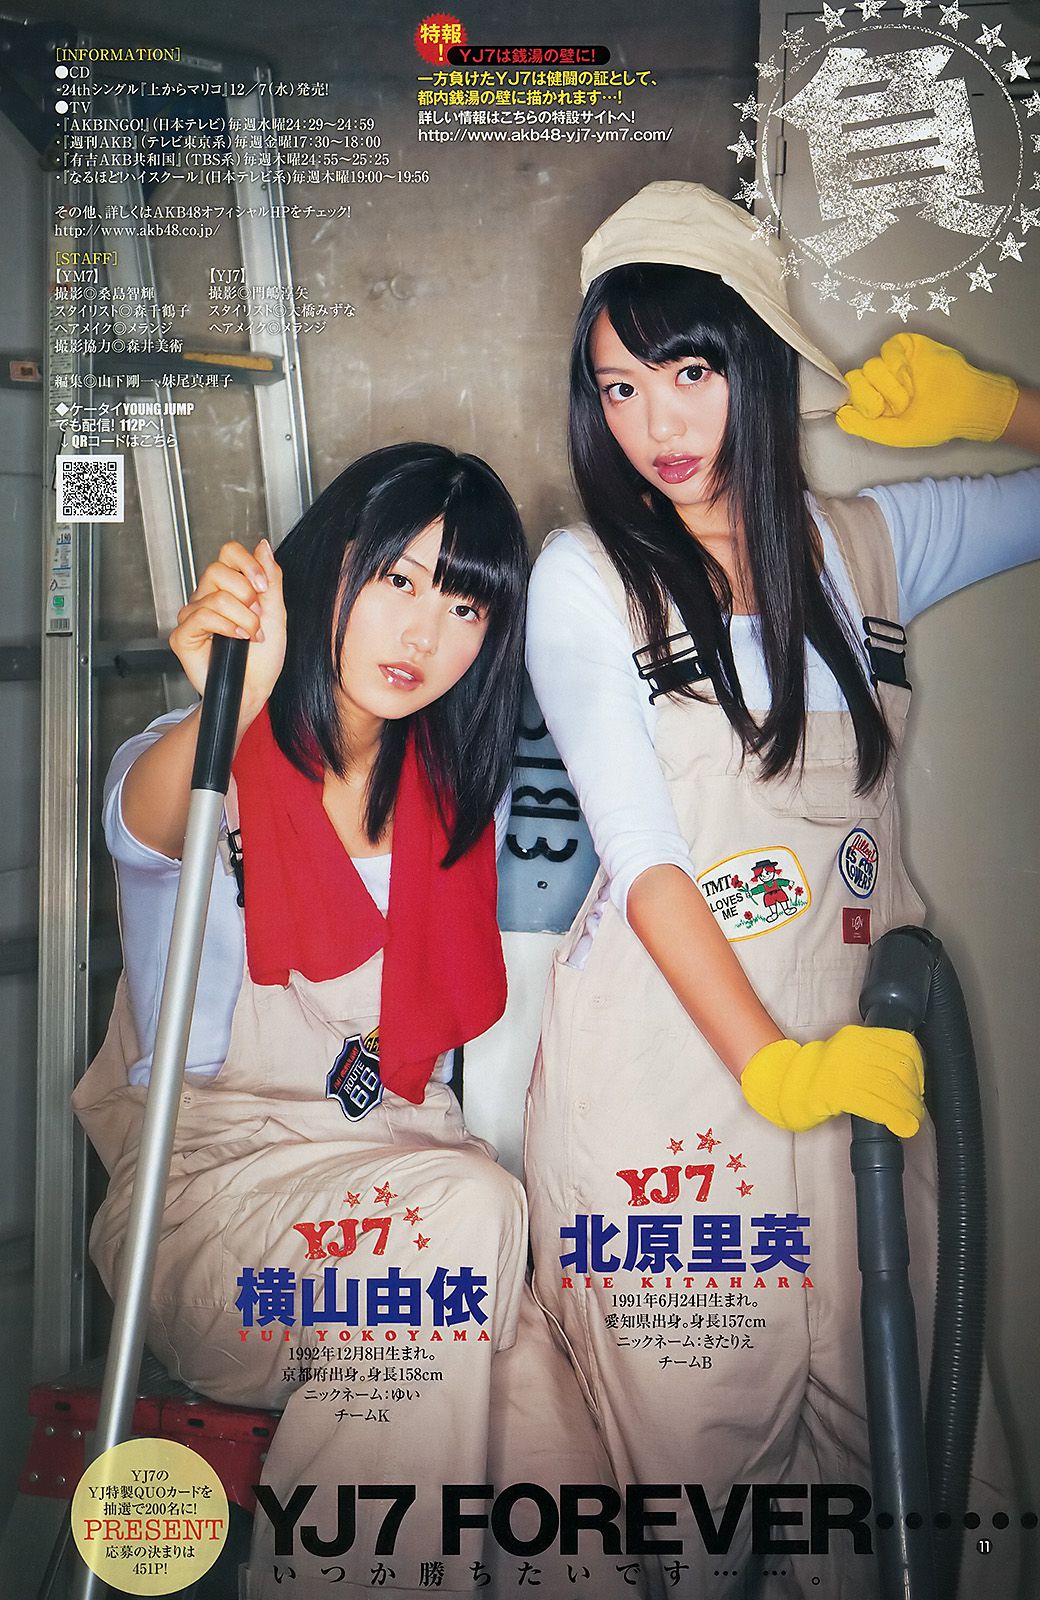 AKB48 YJ7 vs. YM7 神保町・護国寺大戦 FINAL PARTY [Weekly Young Jump] 2012年No.01 写真杂志